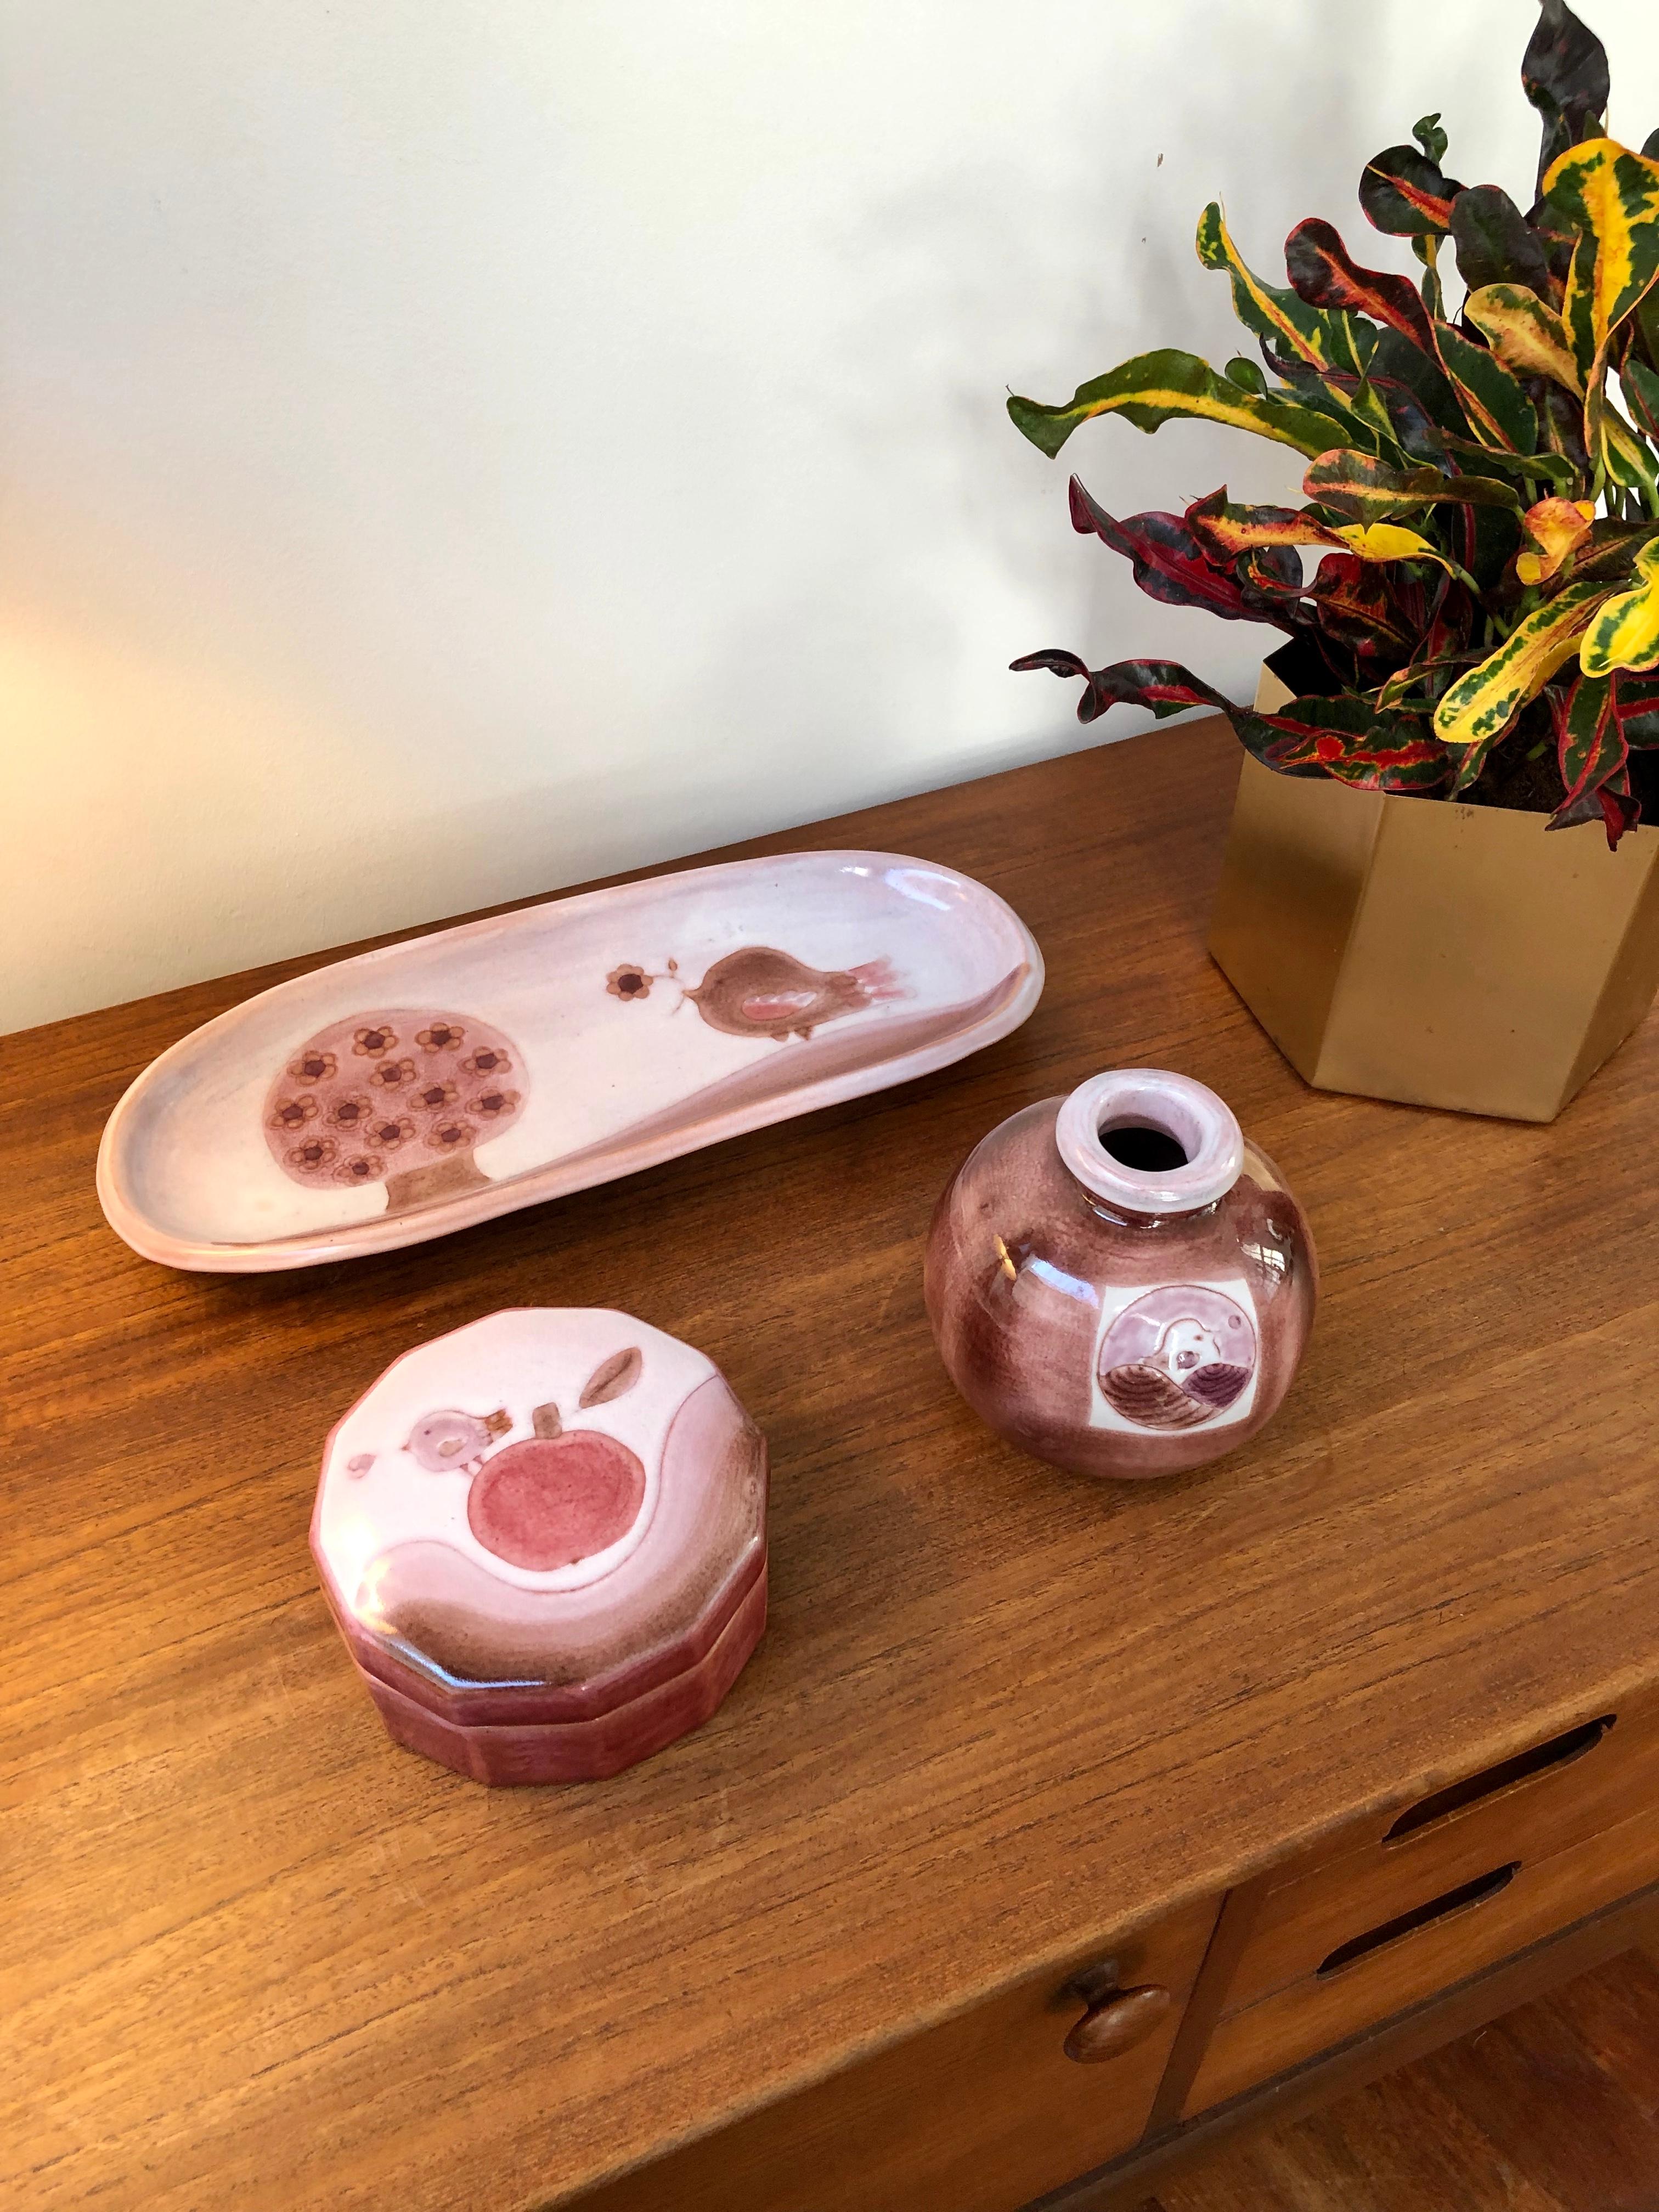 Decorative ceramic set including a tray, small vase and safe-keeping box by the Cloutier brothers (circa 1970s). All pieces made in one of the Cloutier's trademark pinkish-purple colours with whimsical designs with tree (décor arbre), birds and